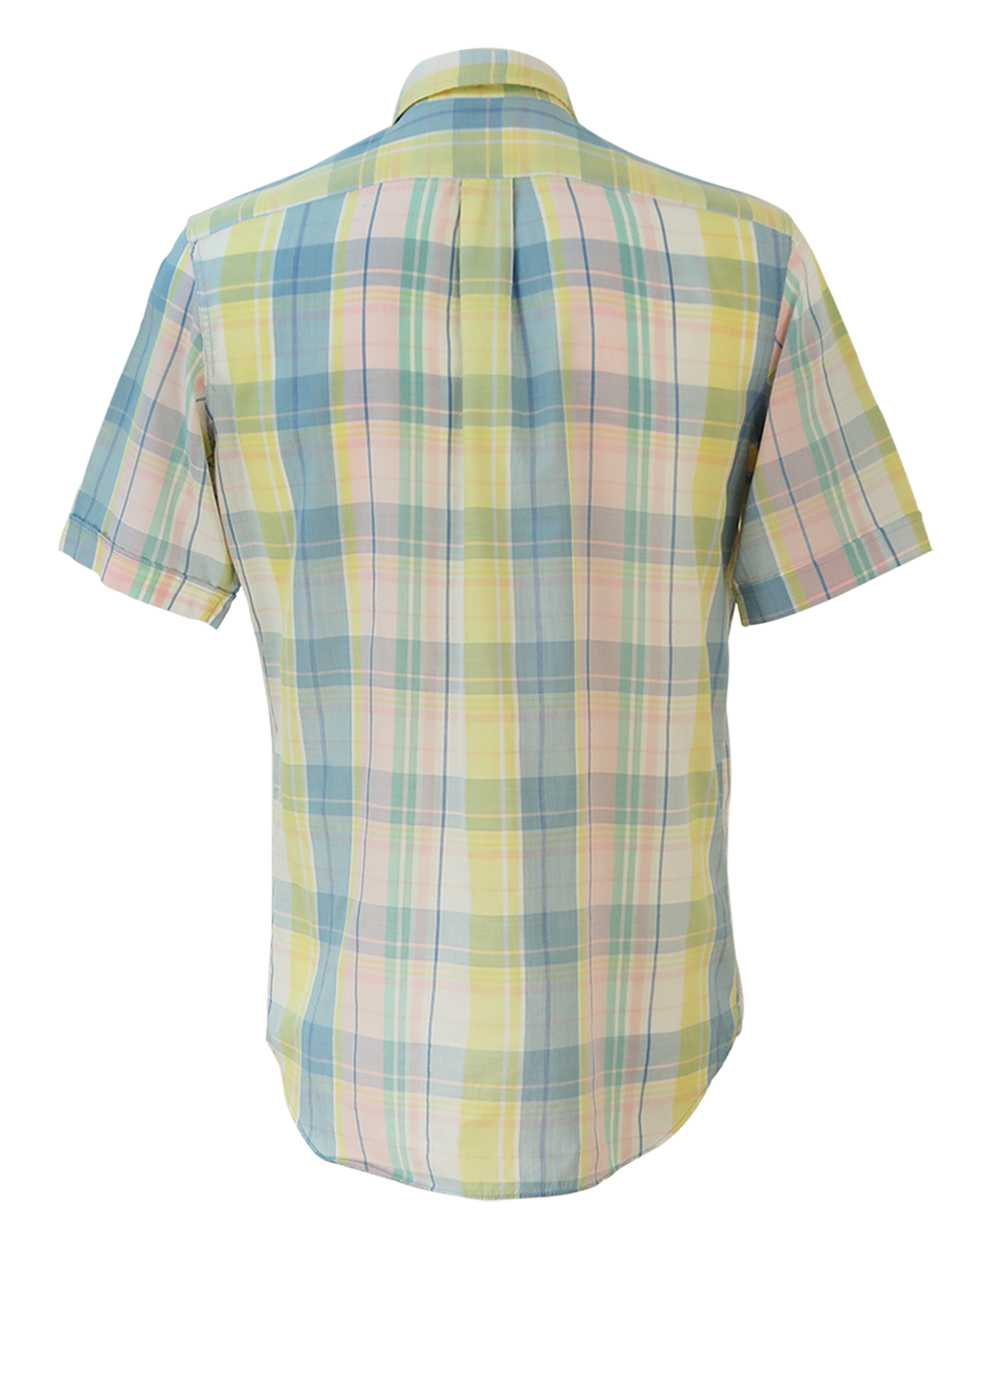 Short Sleeved Check Shirt in Yellow, Blue, Pink & Green Pastel Tones ...